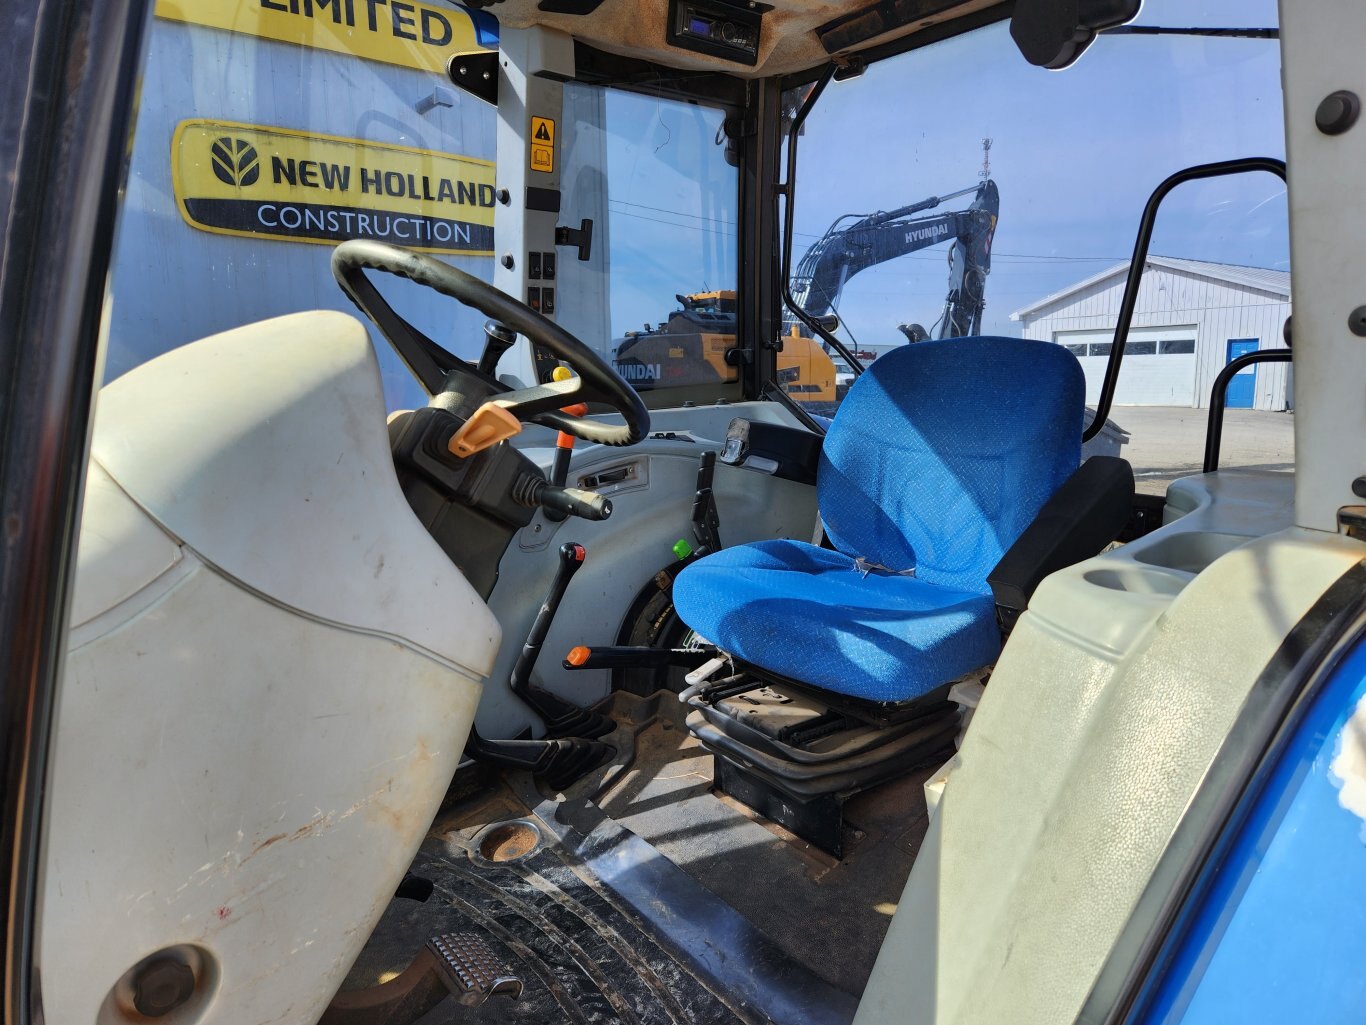 2009 New Holland T5070